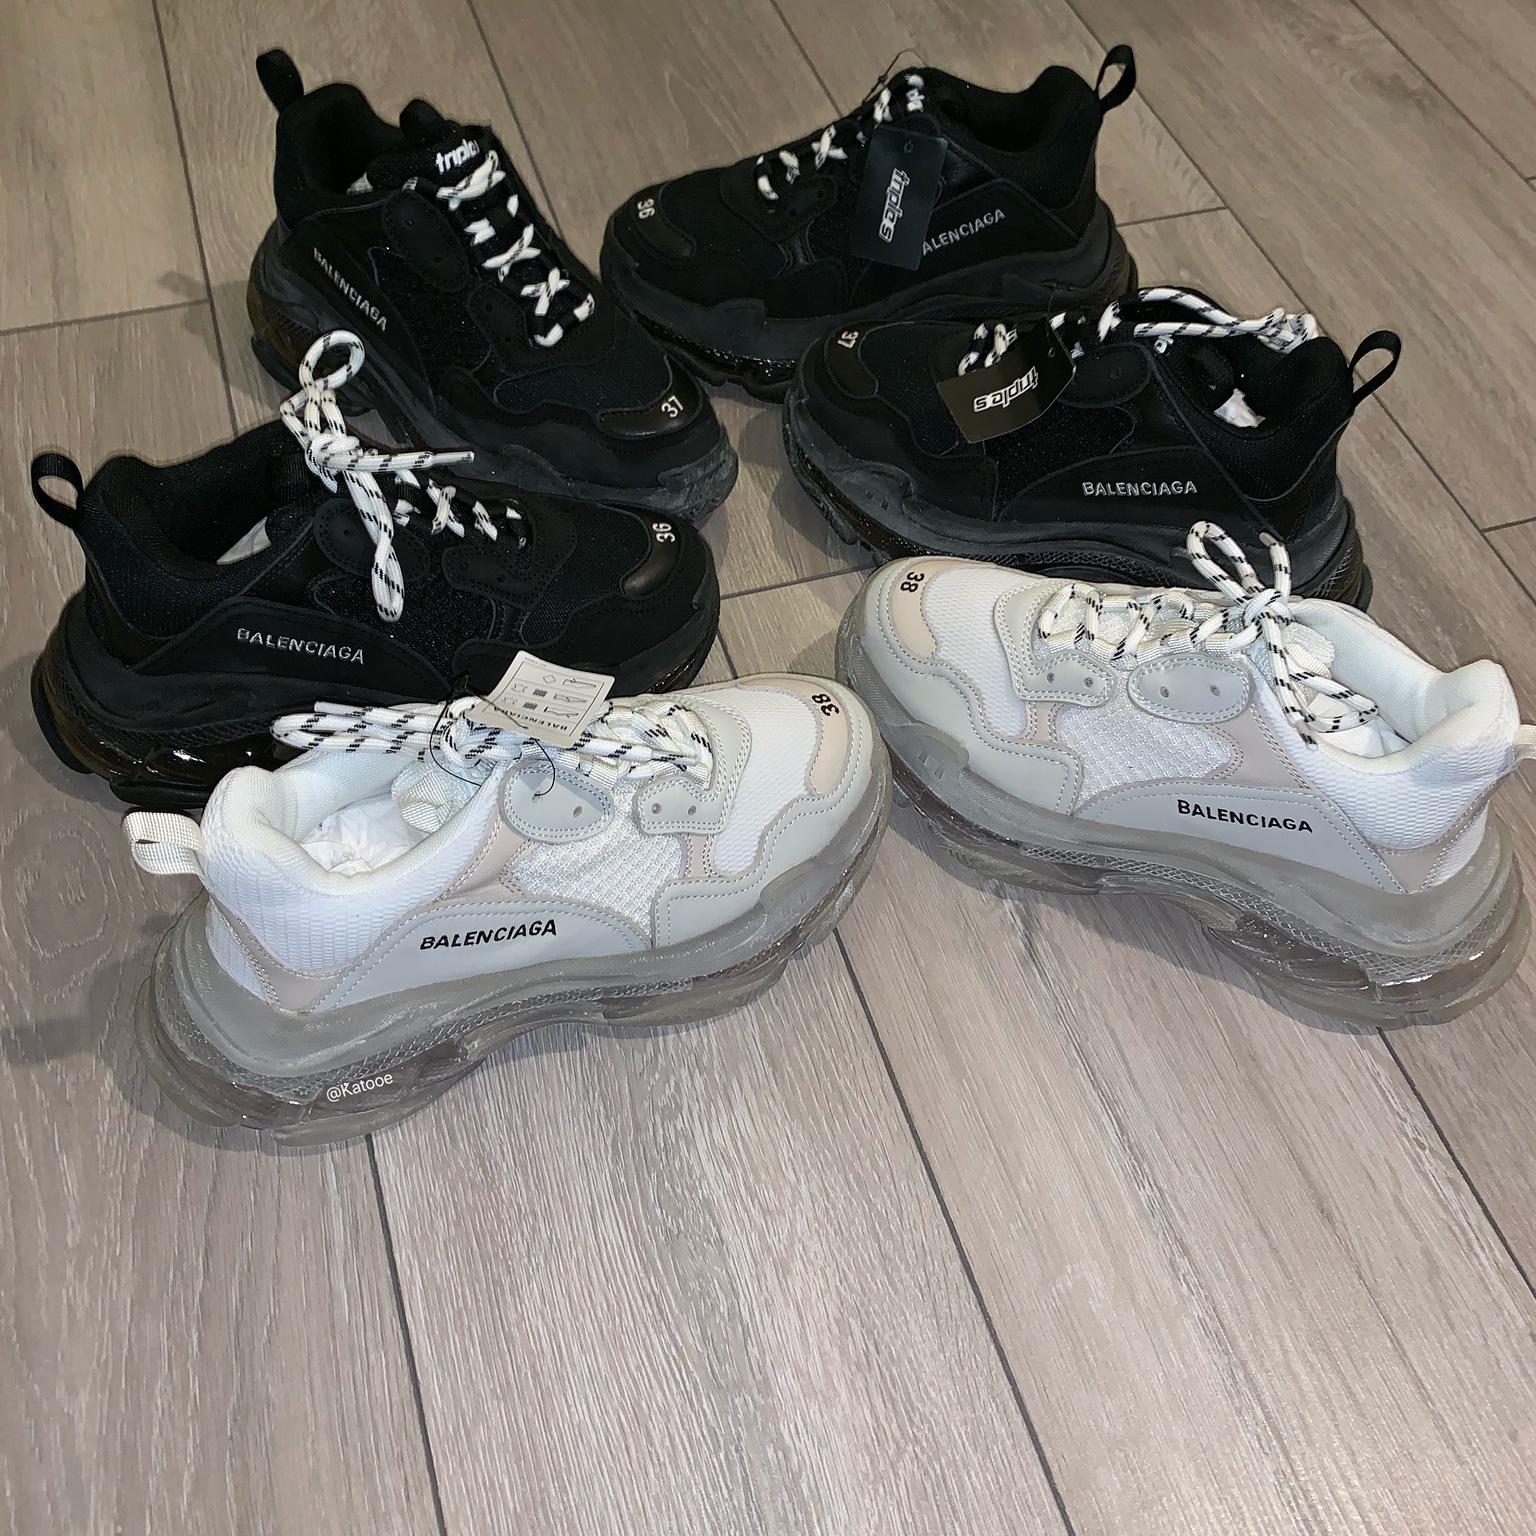 Cheapest place to buy Balenciaga Triple S Trainer sneakers